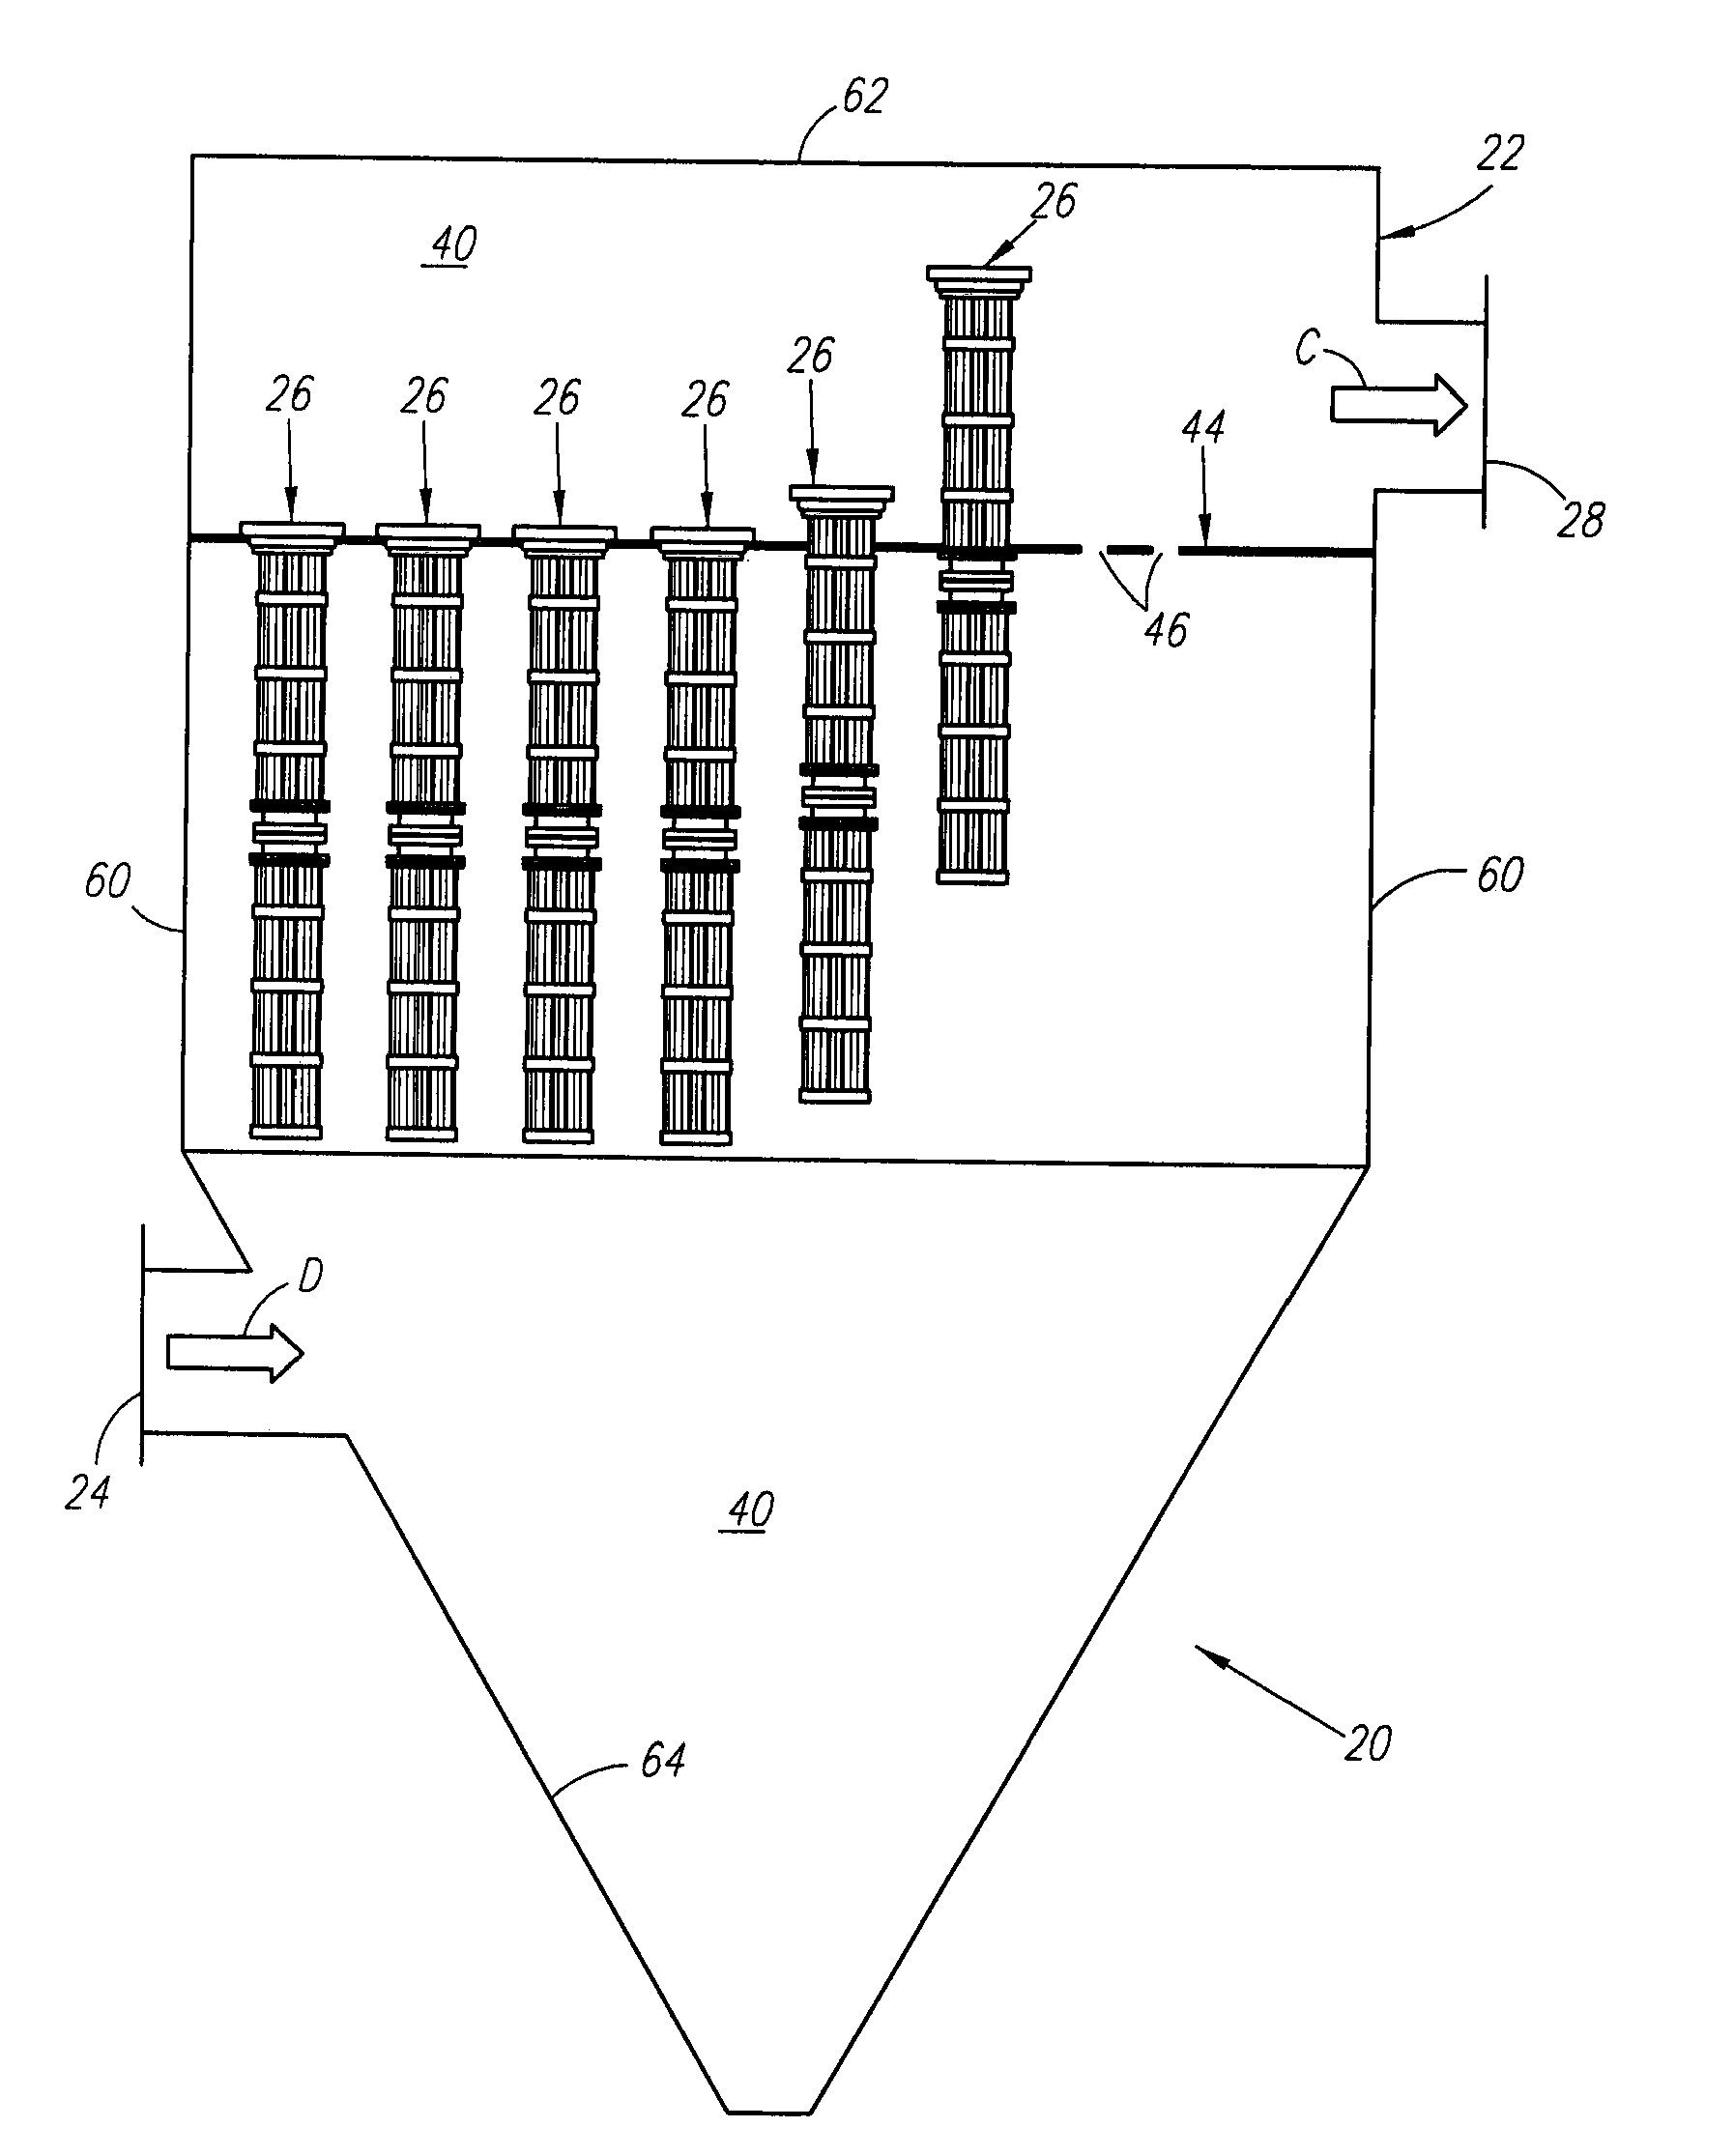 Twist and lock connection for pleated filter element with flange-to-flange locking means